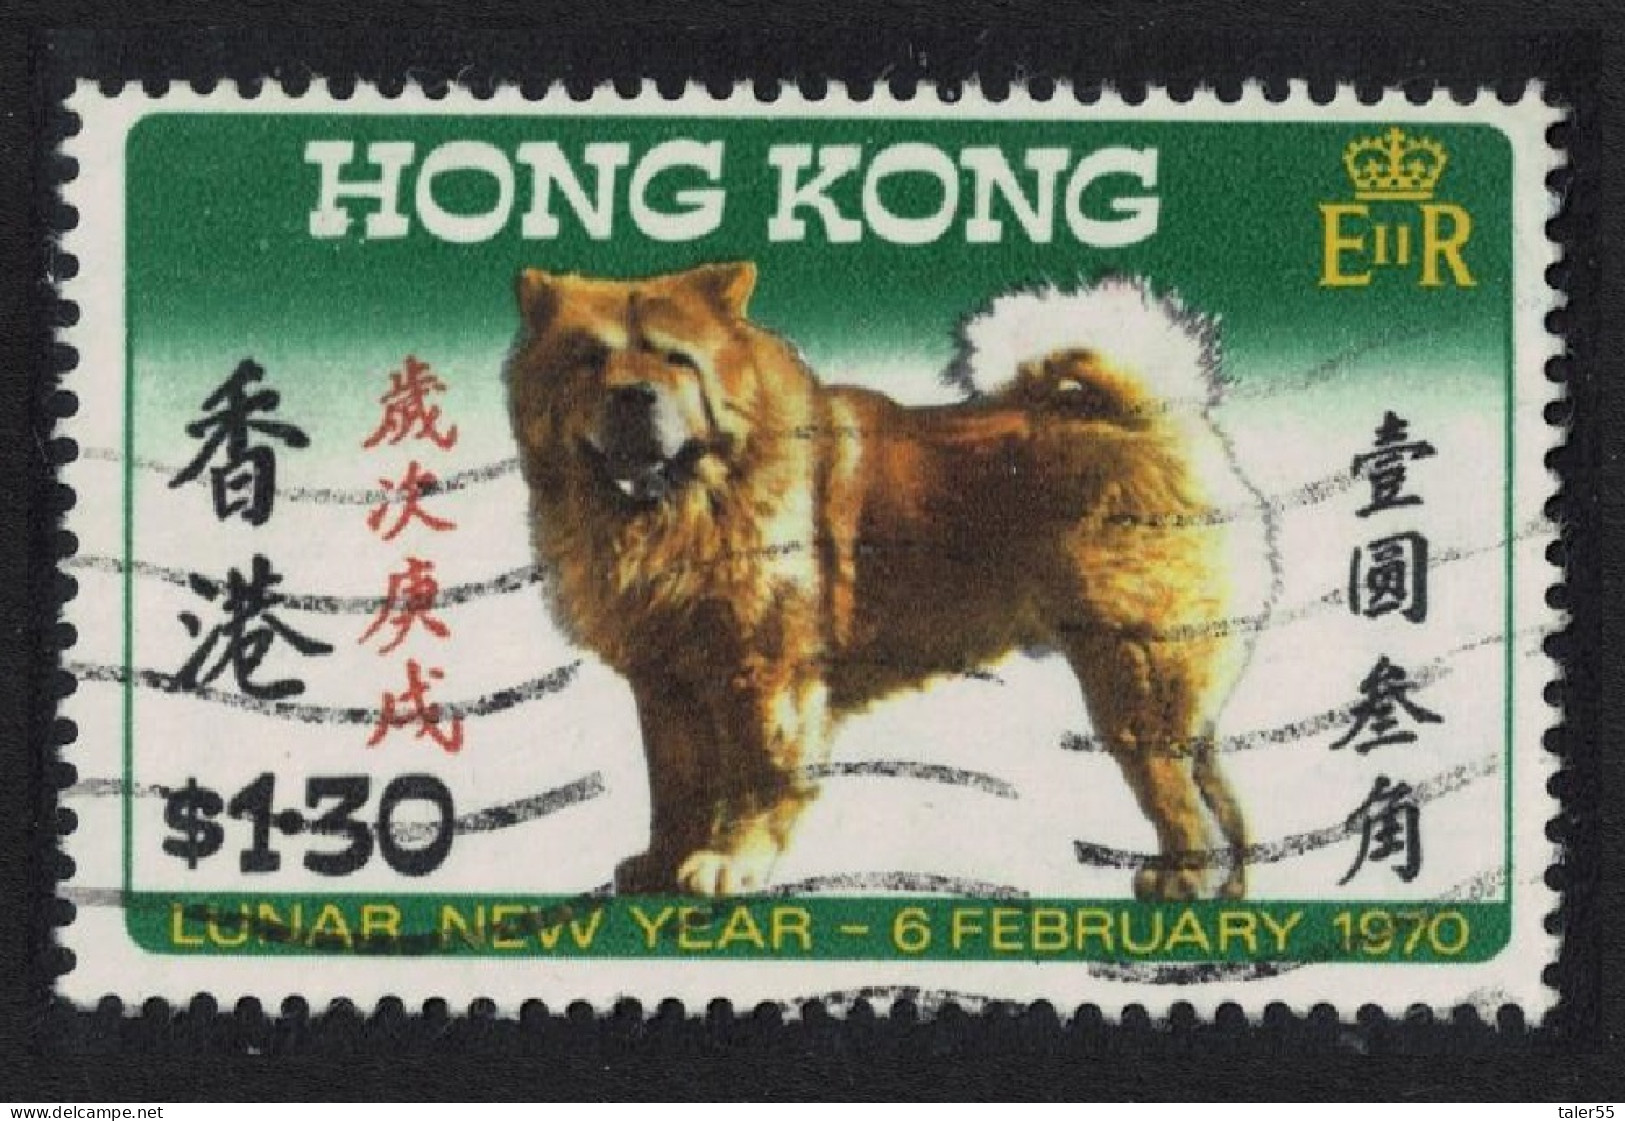 Hong Kong Chinese New Year. Year Of The Dog $1.30 1970 Canc SG#262 - Used Stamps